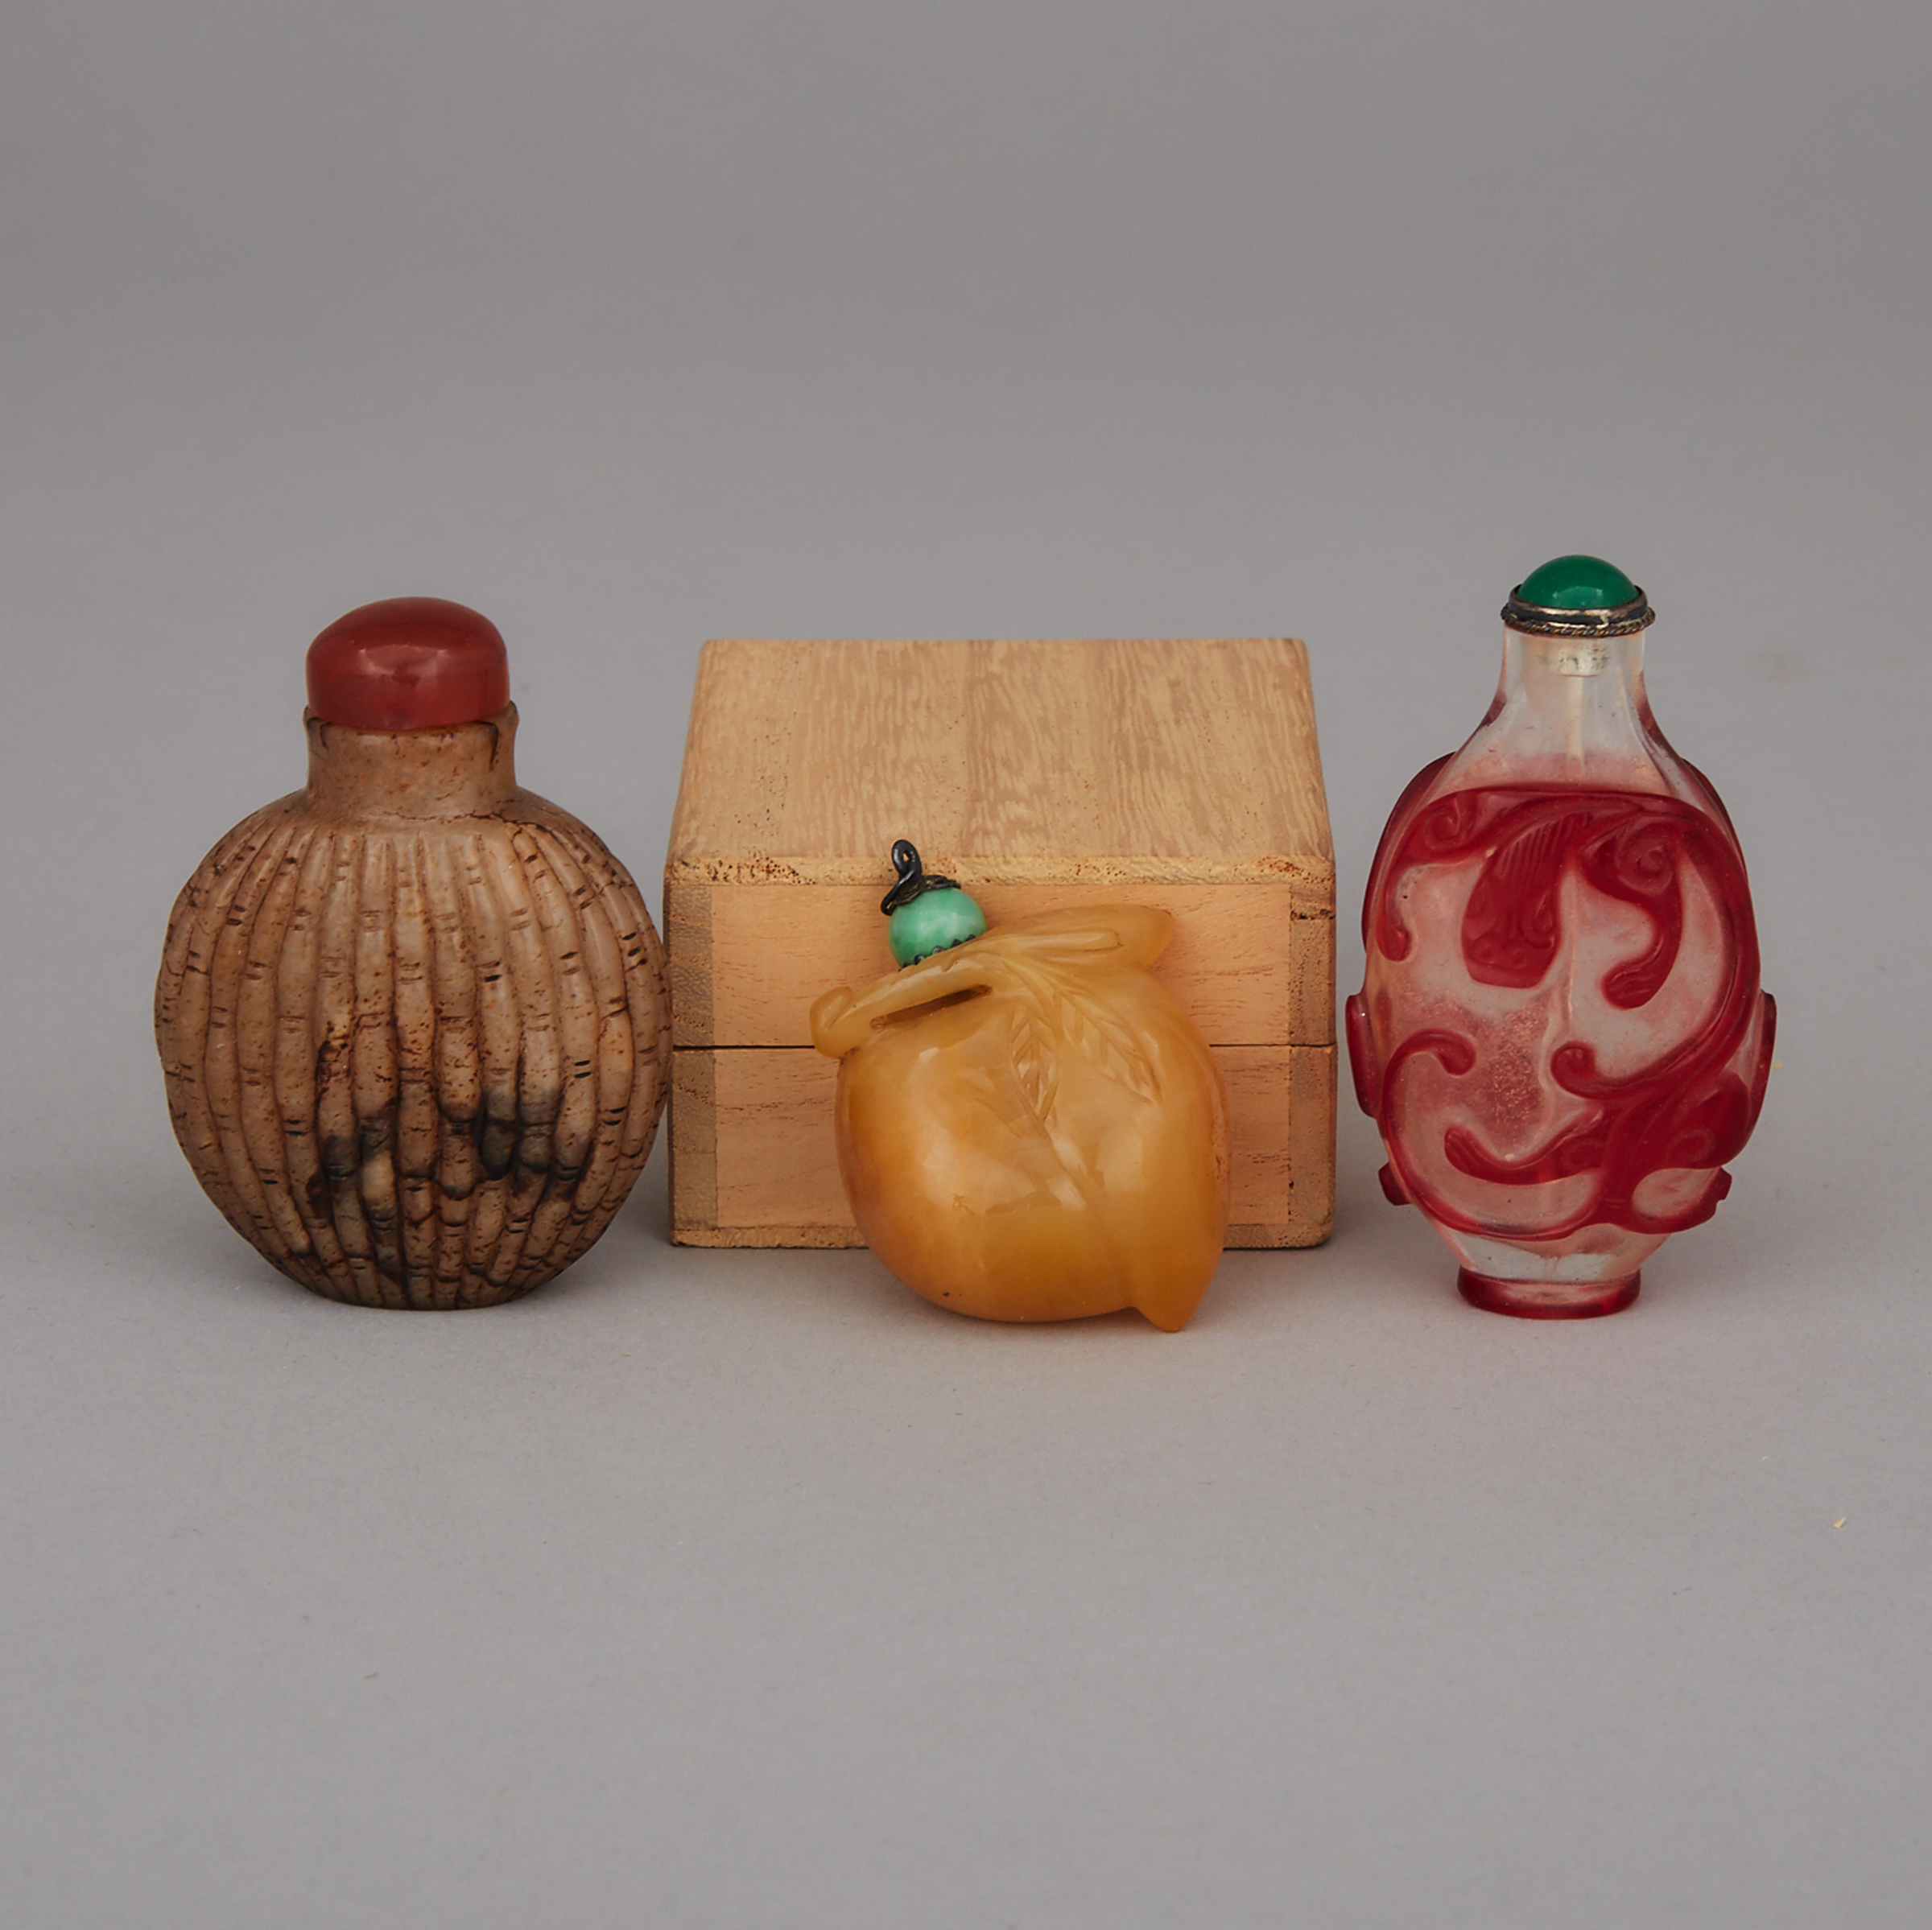 A Group of Three Snuff Bottles, 19th Century